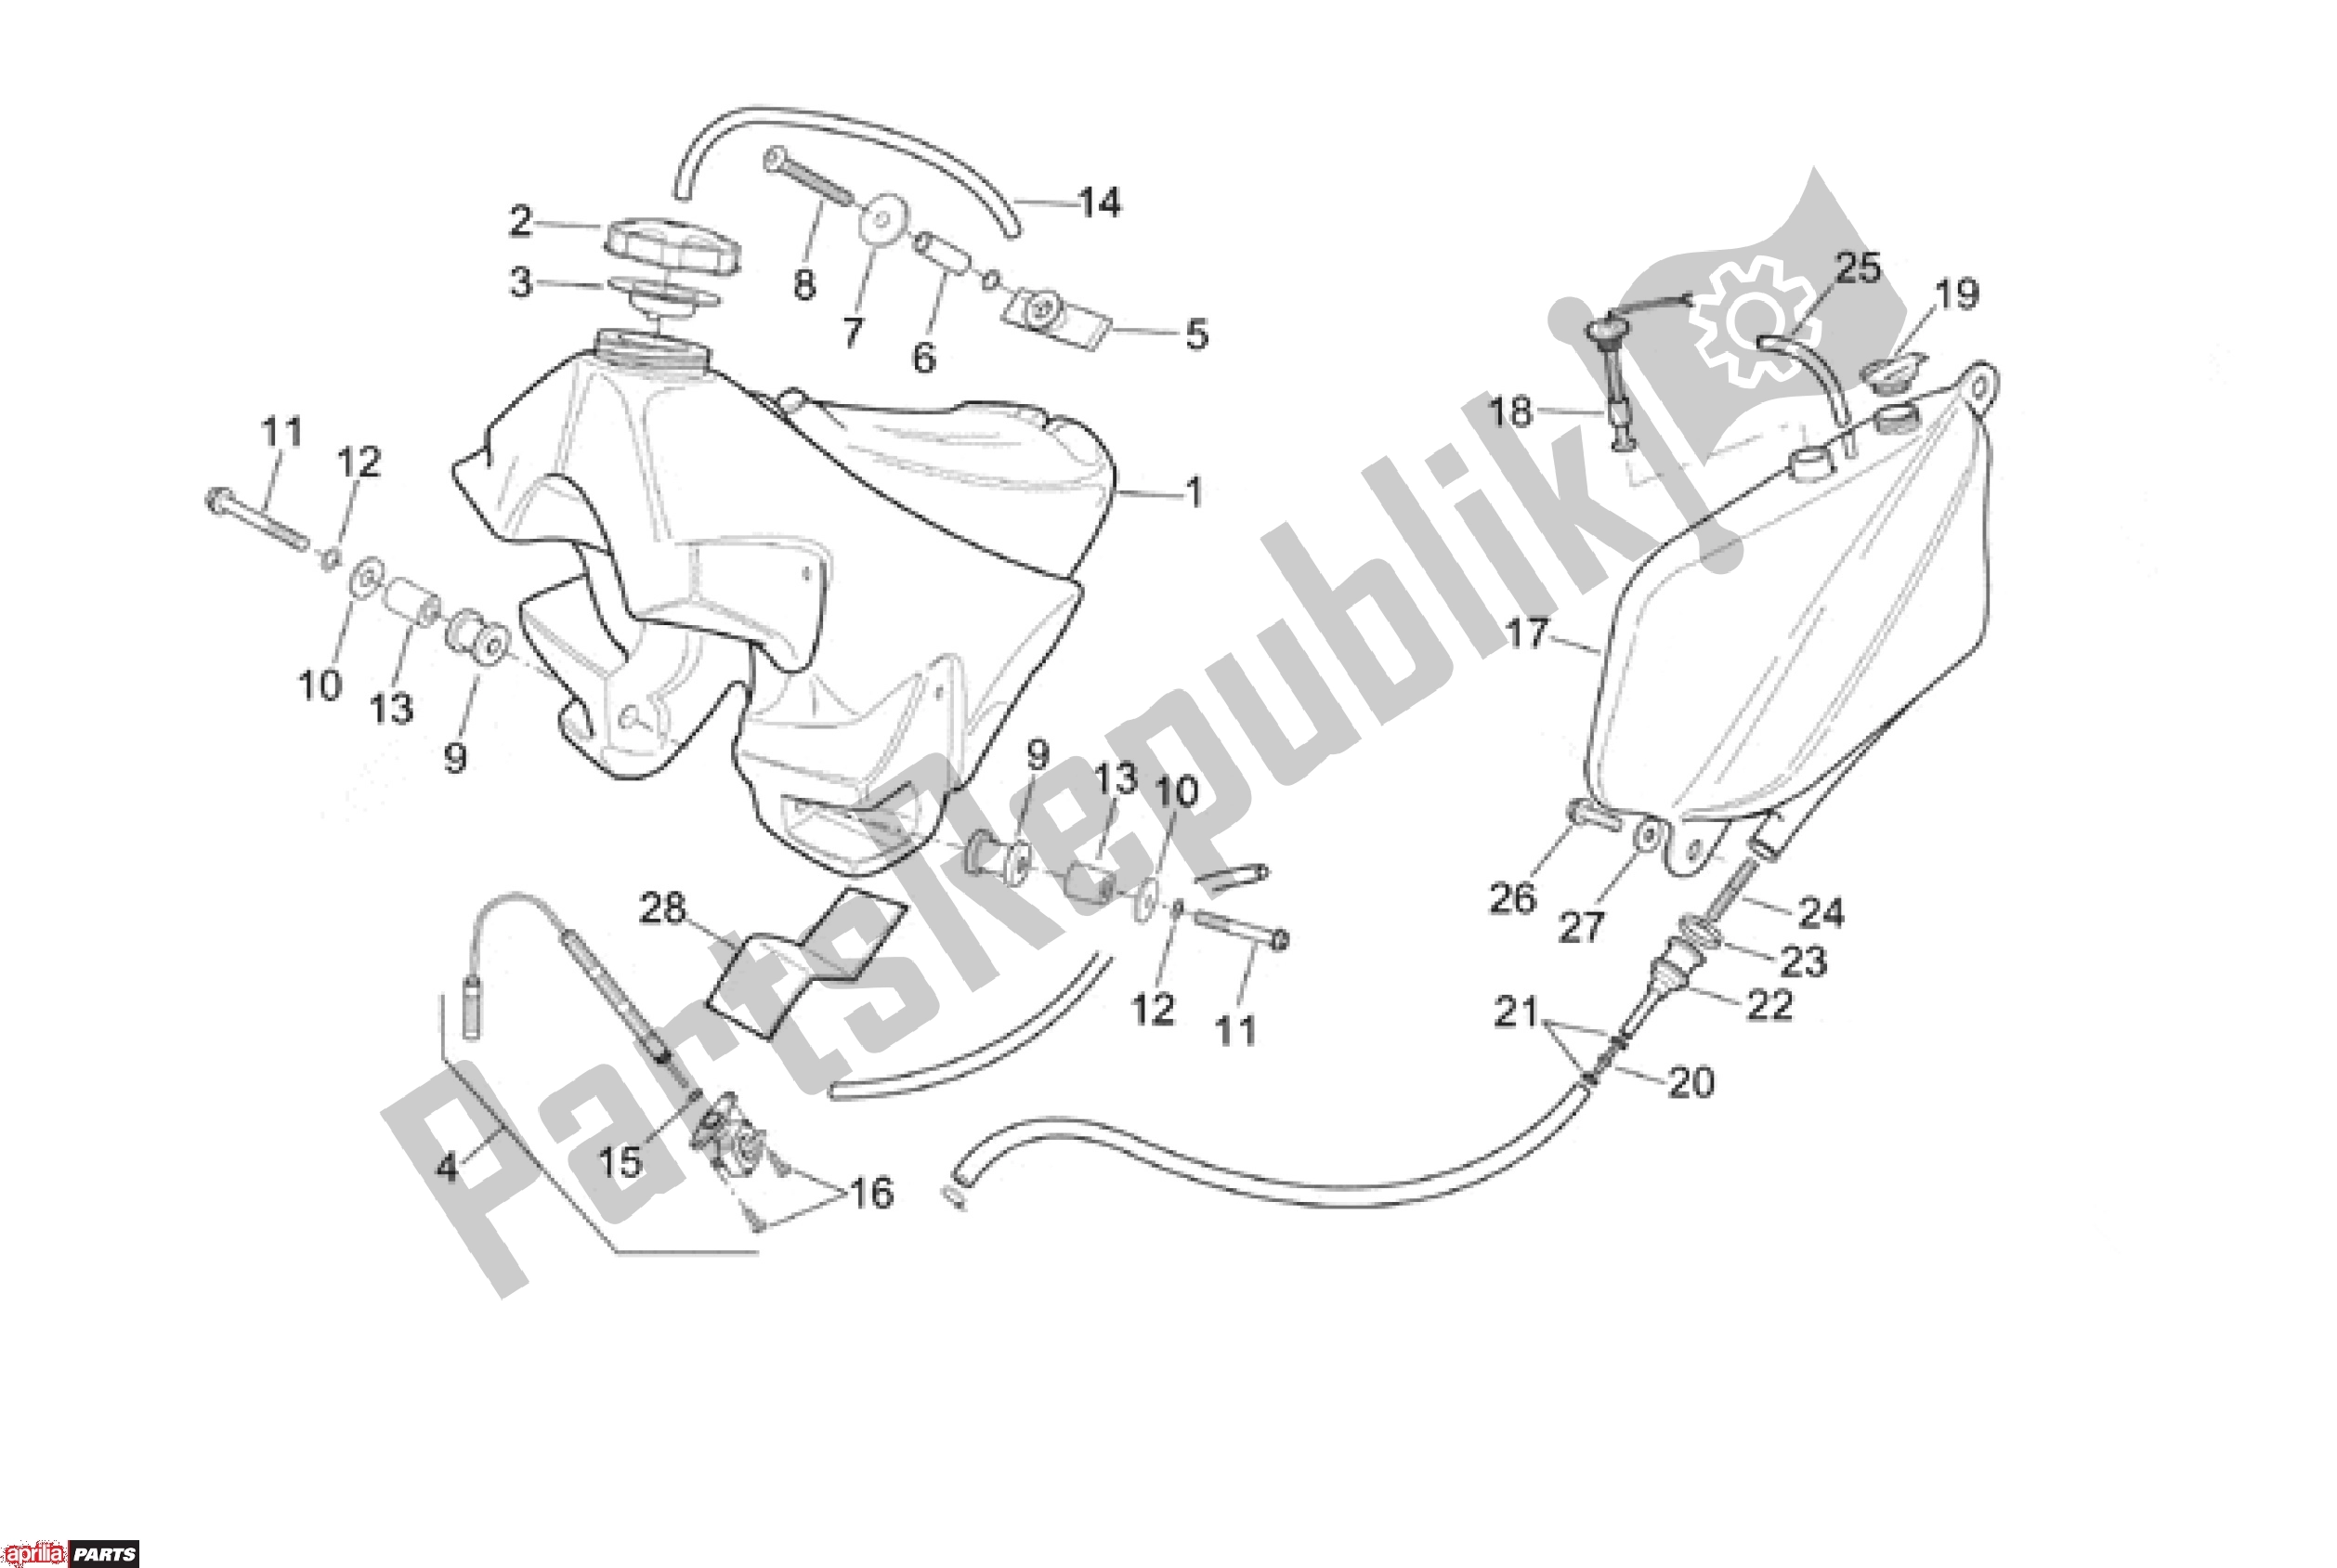 All parts for the Tank of the Aprilia ETX / RX 108 125 1999 - 2001